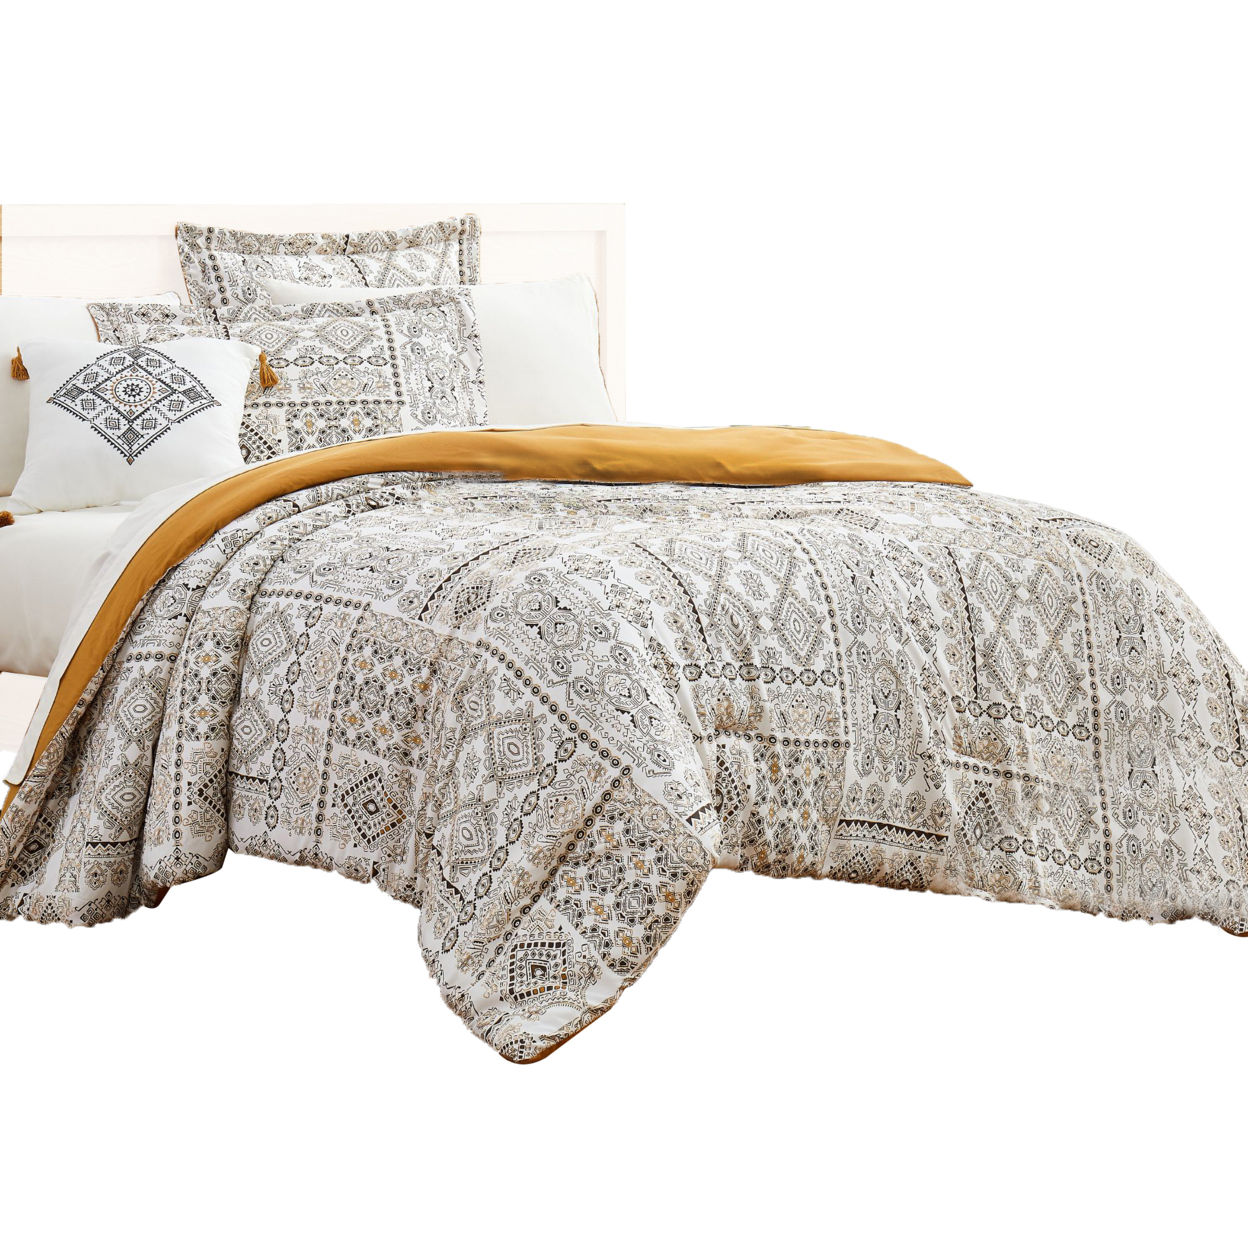 Chania 8 Piece King Bed Set With Tribal Print The Urban Port, White And Brown- Saltoro Sherpi